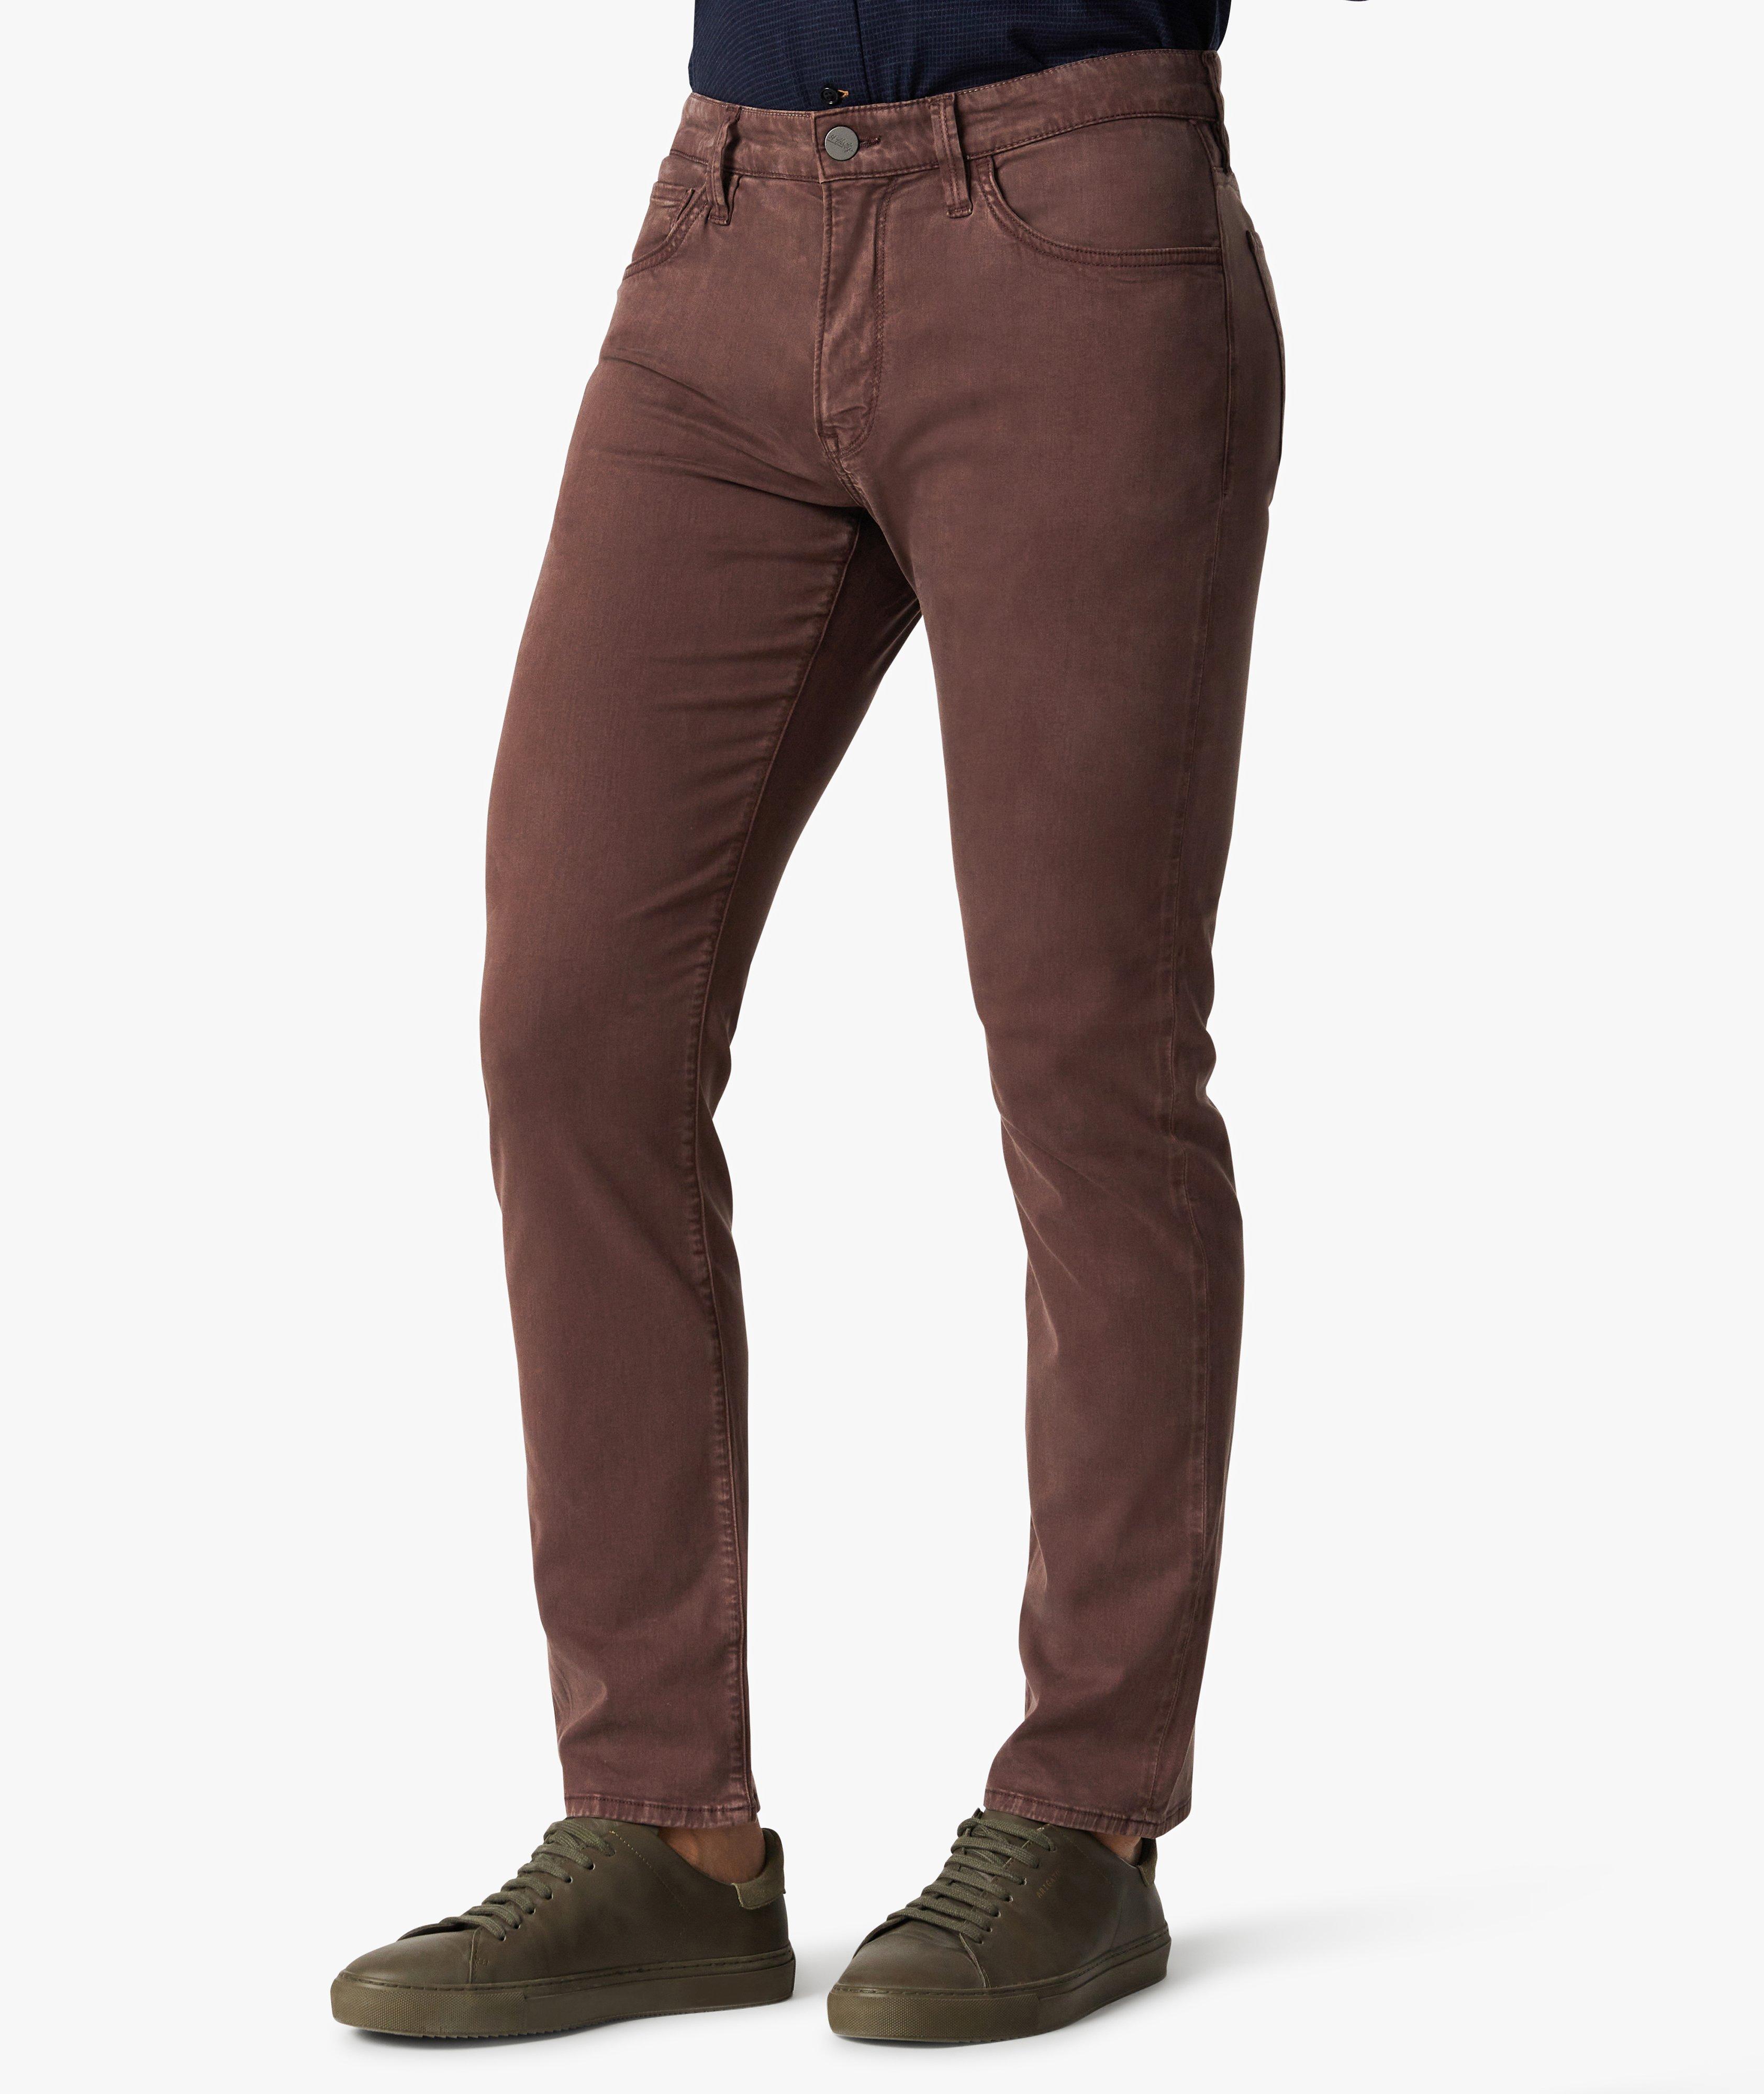 Courage Straight Leg Cotton Twill-Blend Pants image 1